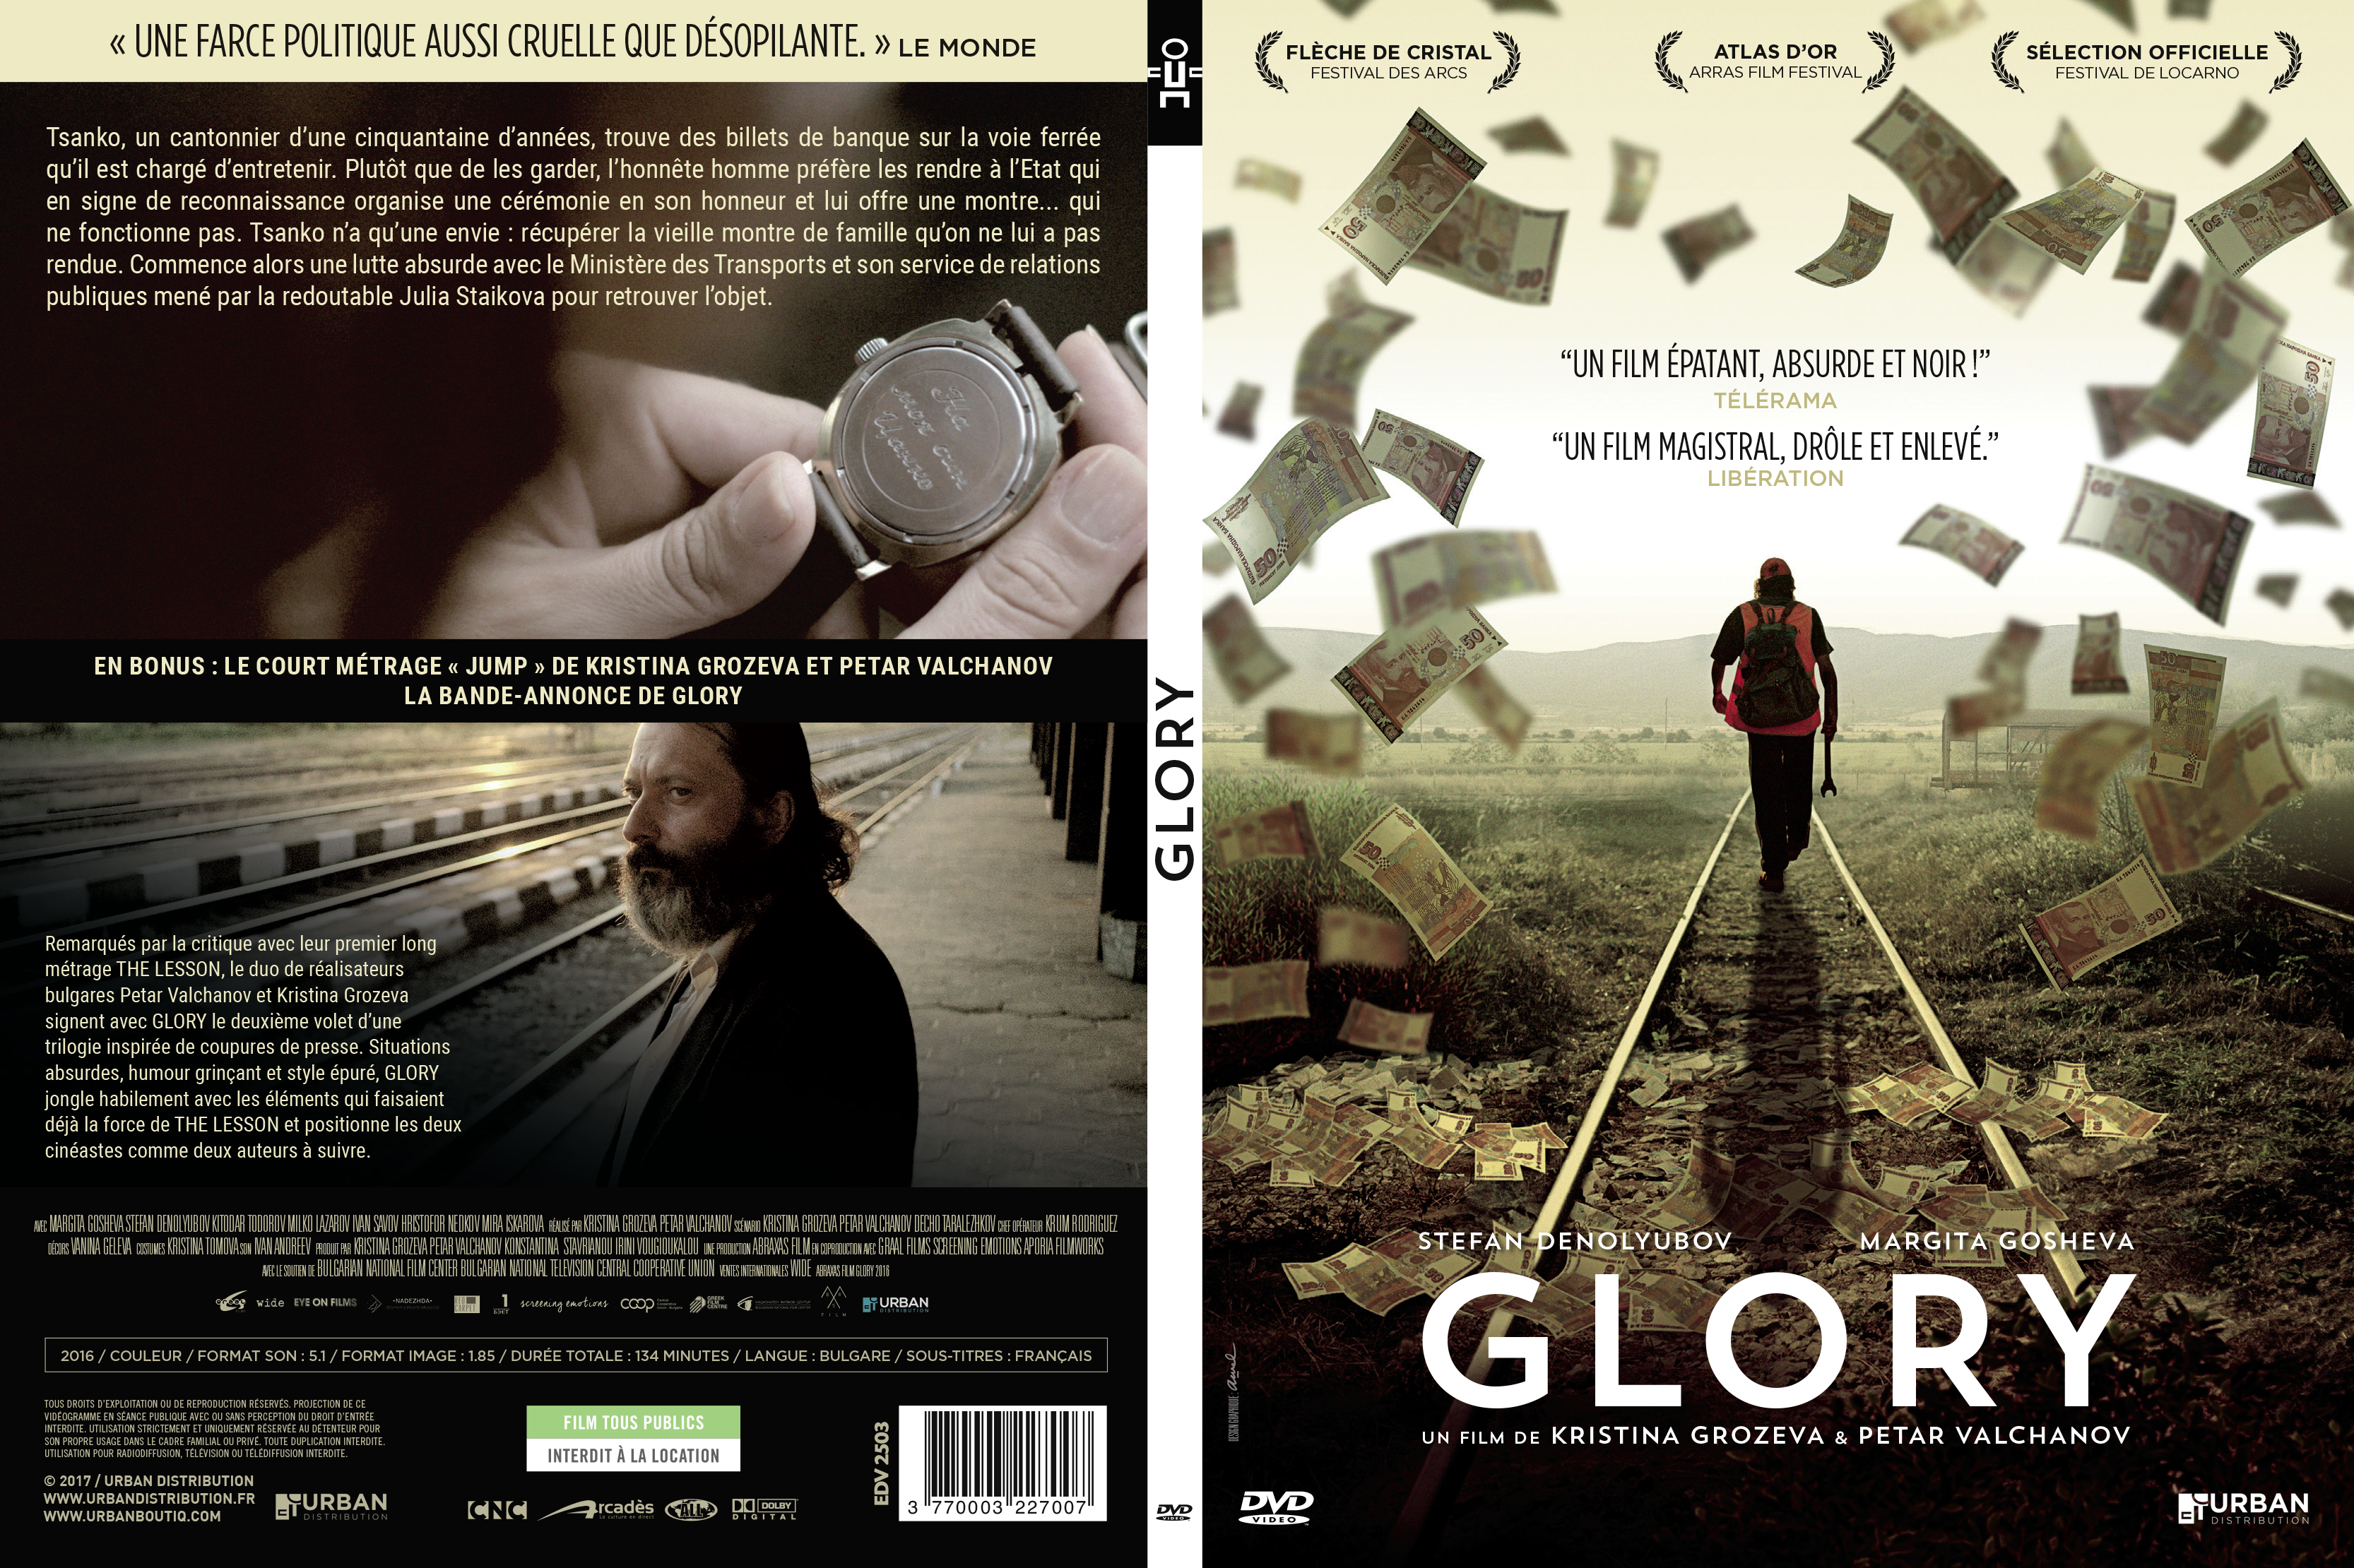 Jaquette DVD Glory (2017)